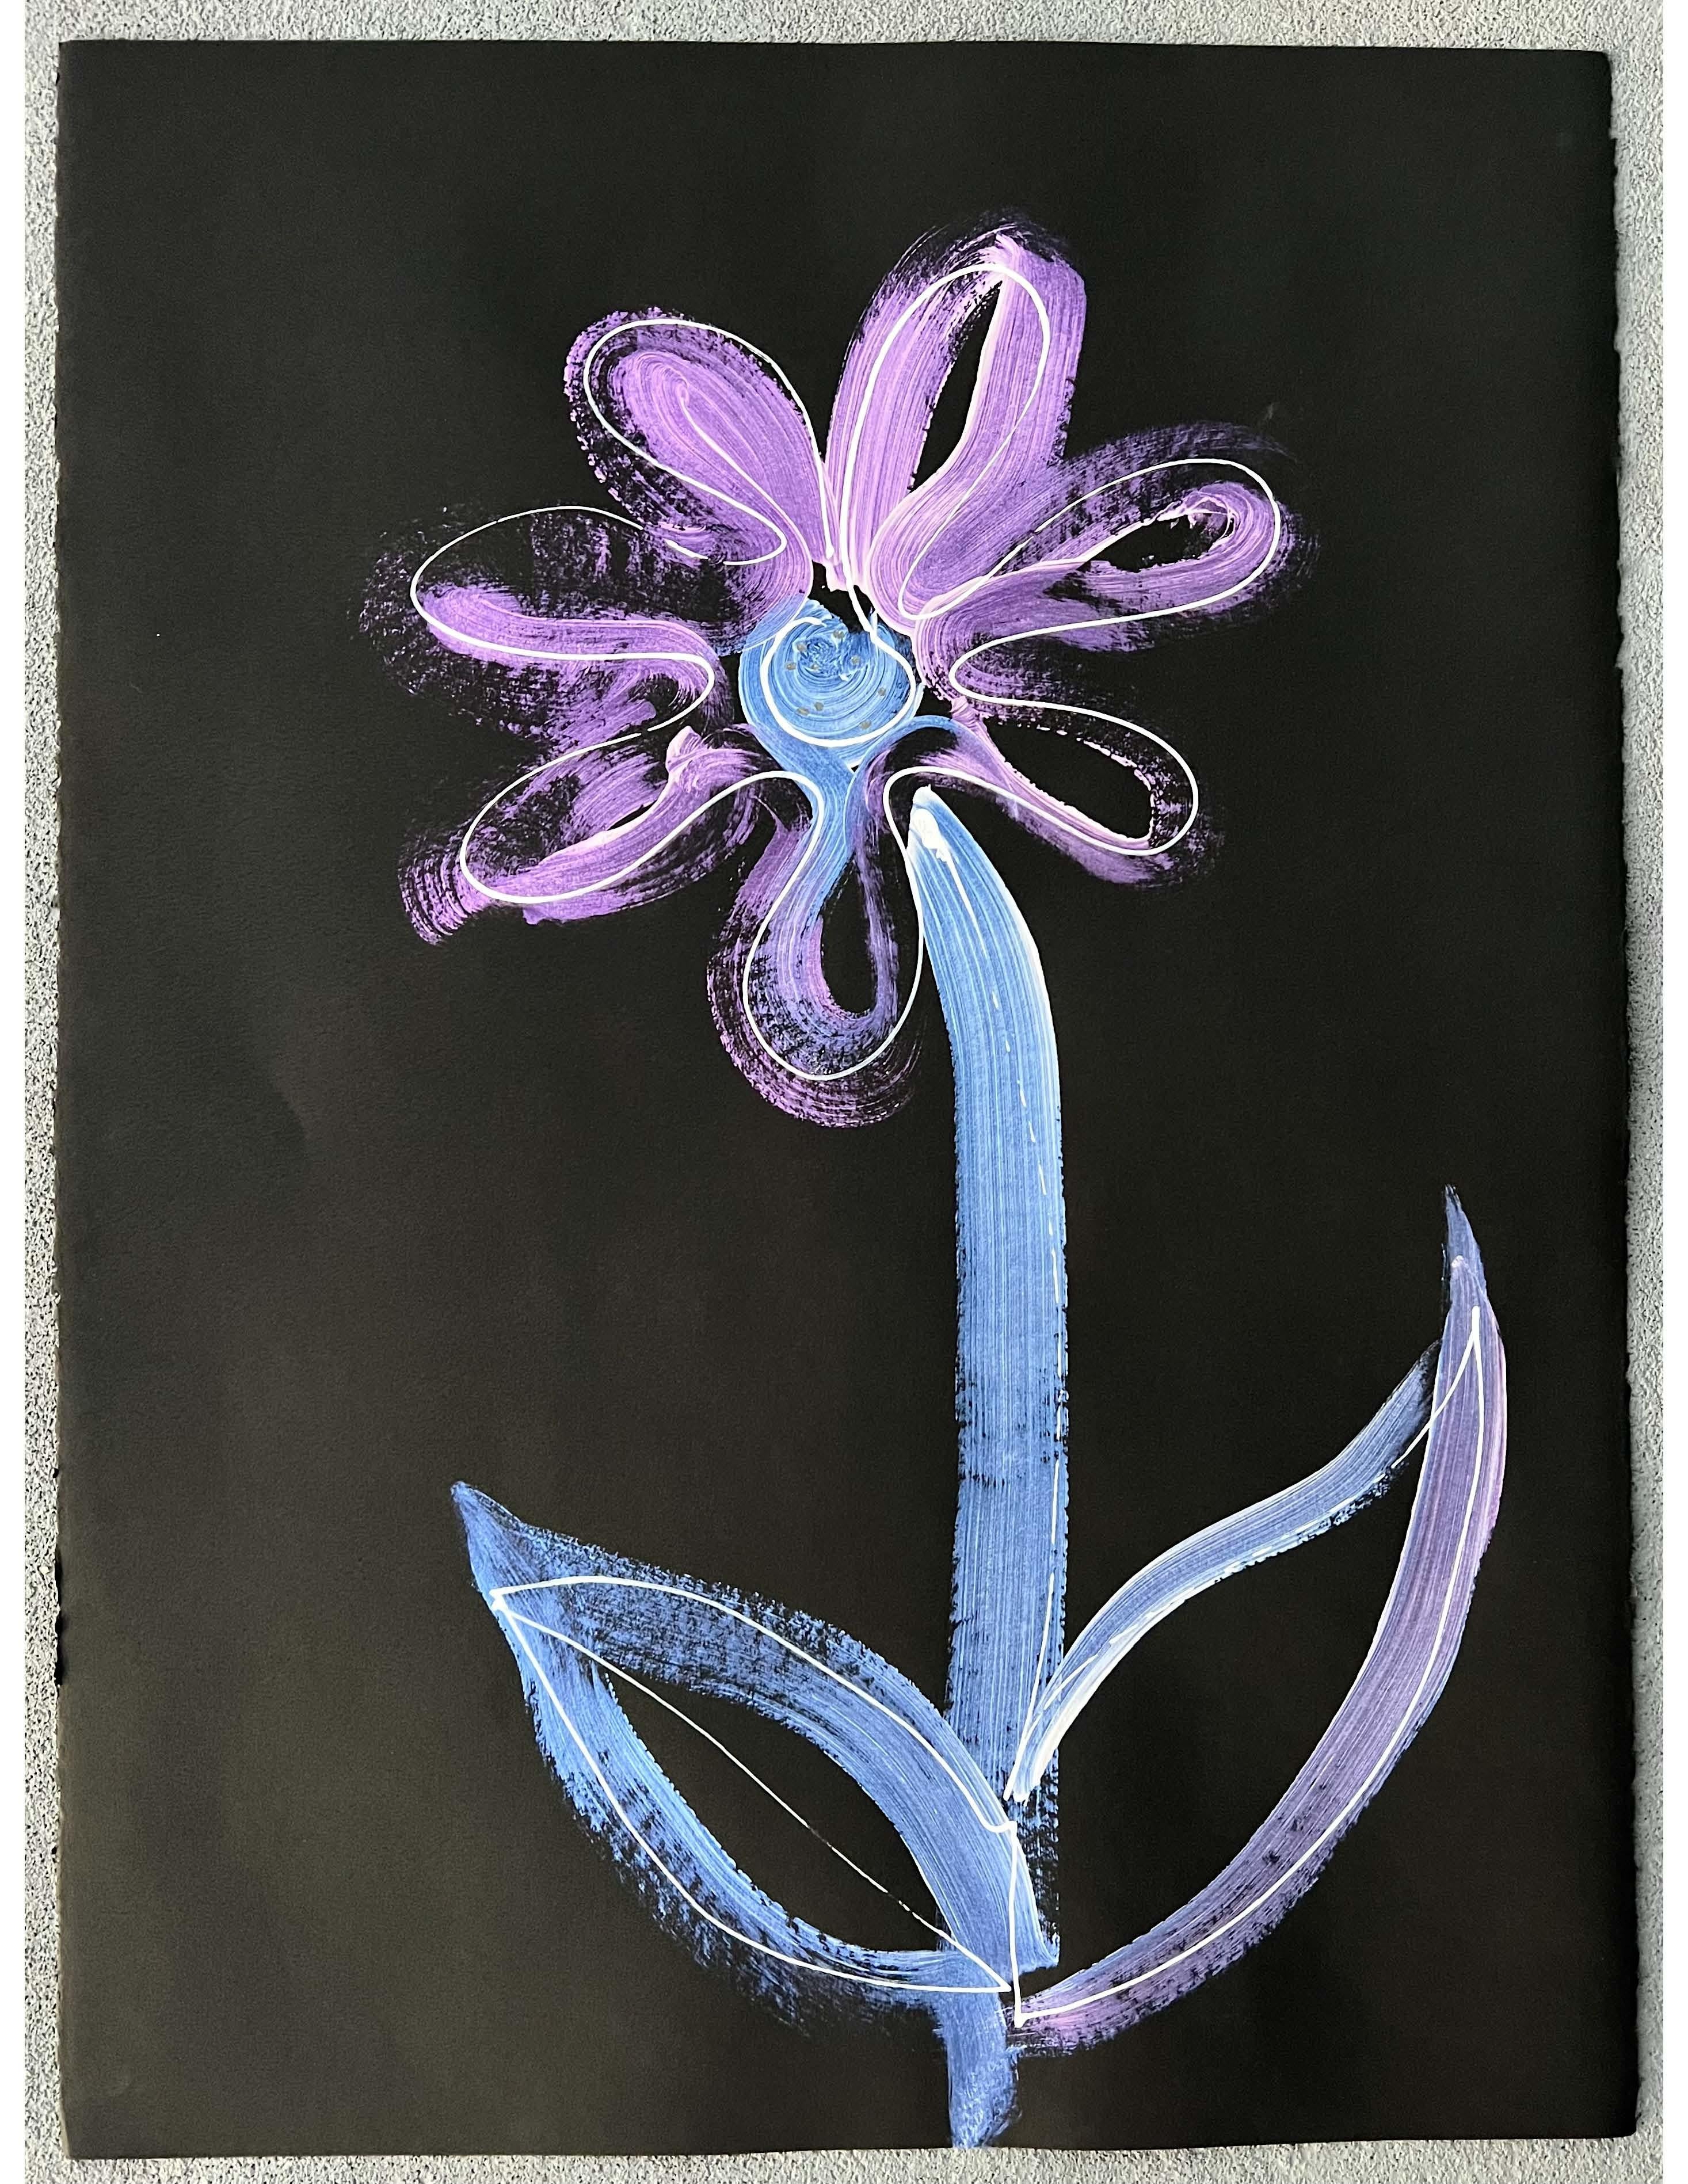 Flower image in Purple, blue and white interference paint on black Stonehenge paper.   Signed by the artist